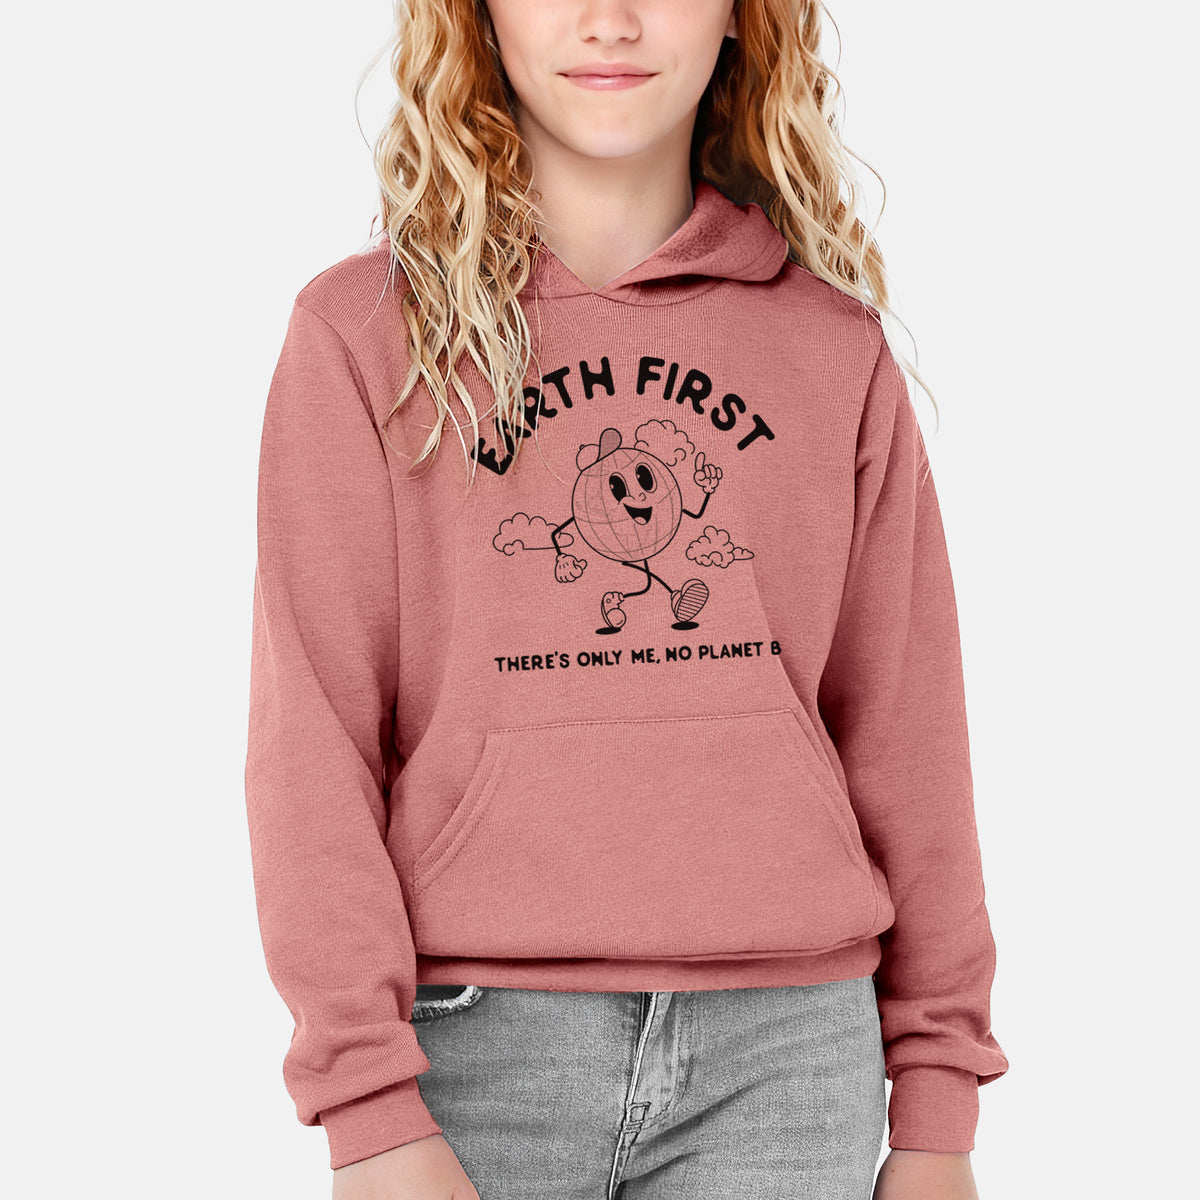 Earth First - There&#39;s Only Me, No Planet B - Youth Hoodie Sweatshirt